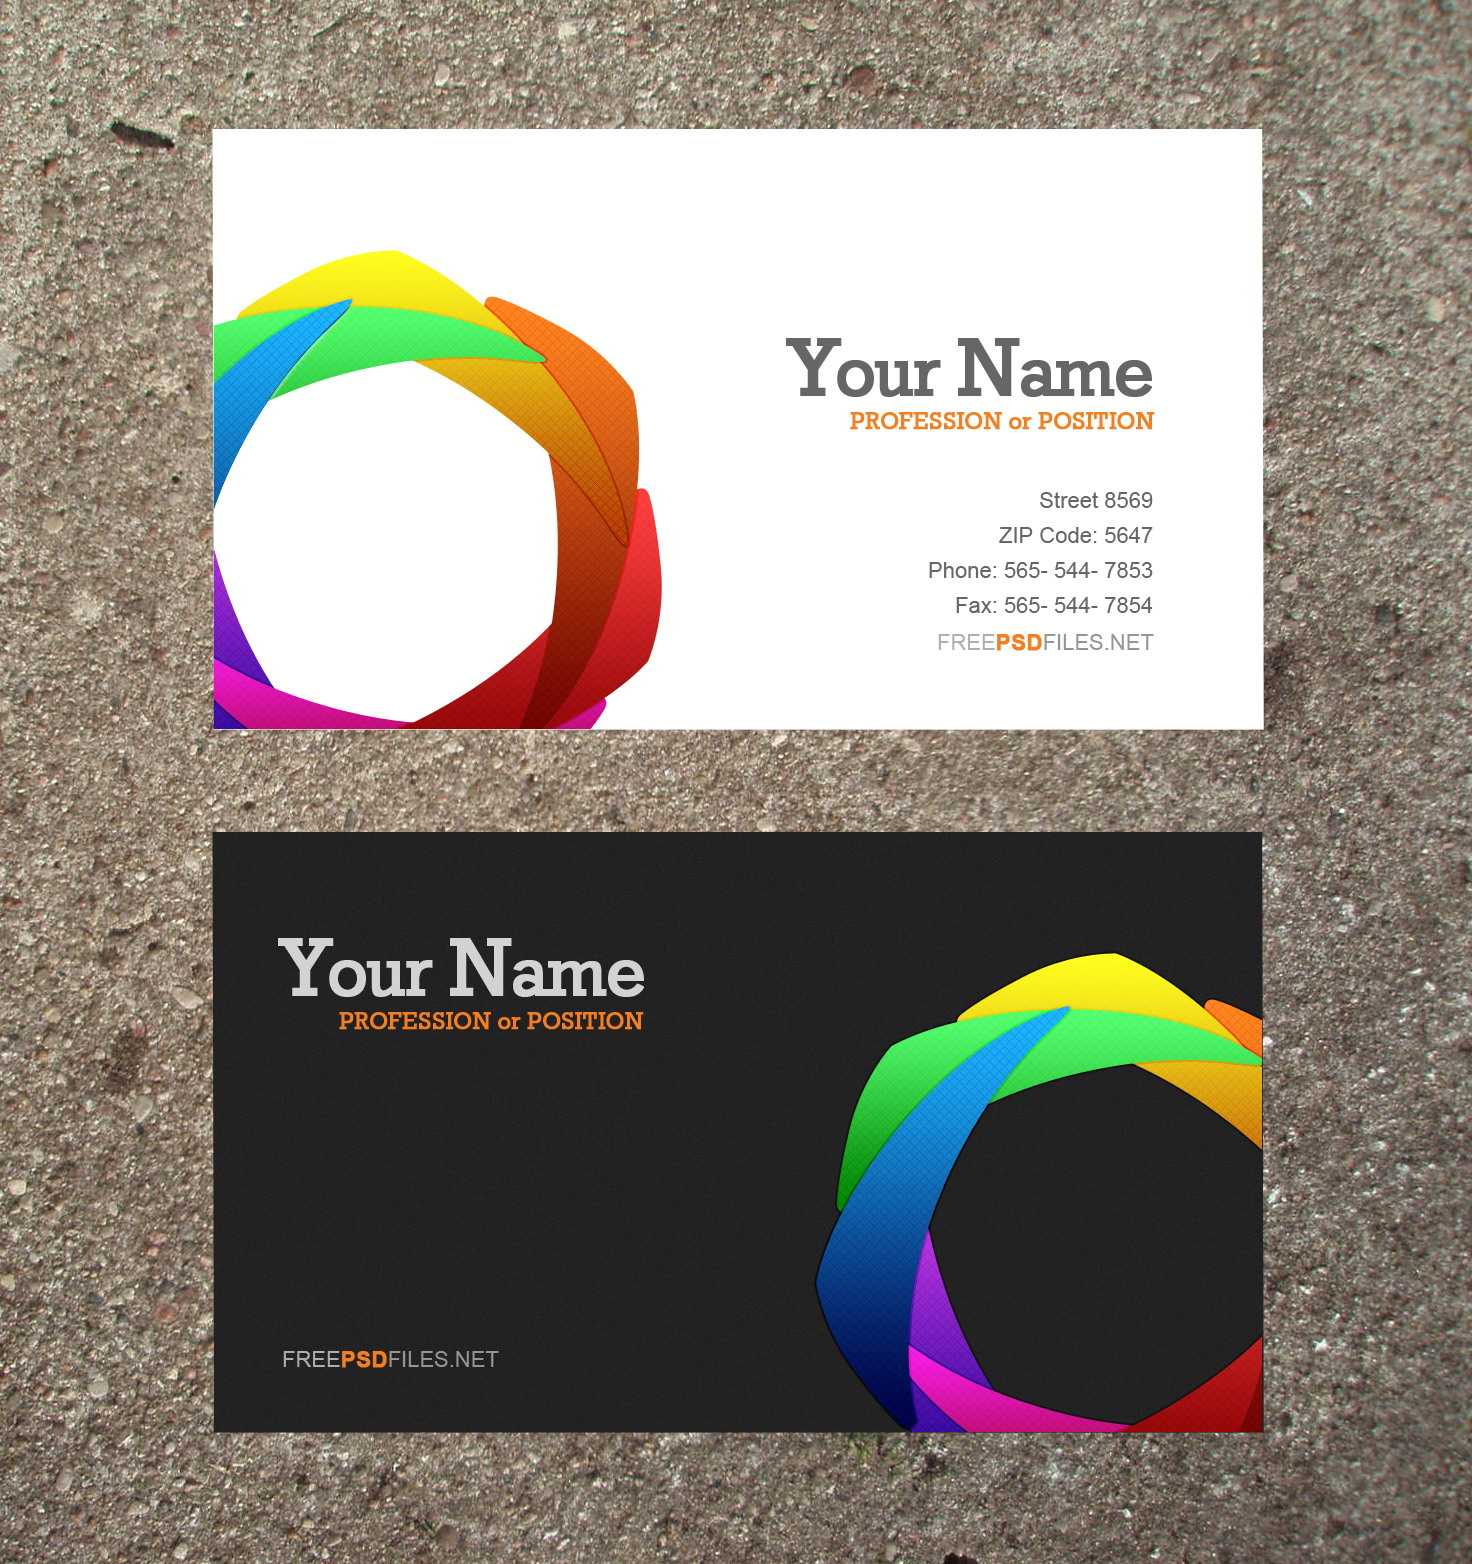 16 Business Card Templates Images – Free Business Card Inside Free Business Cards Templates For Word